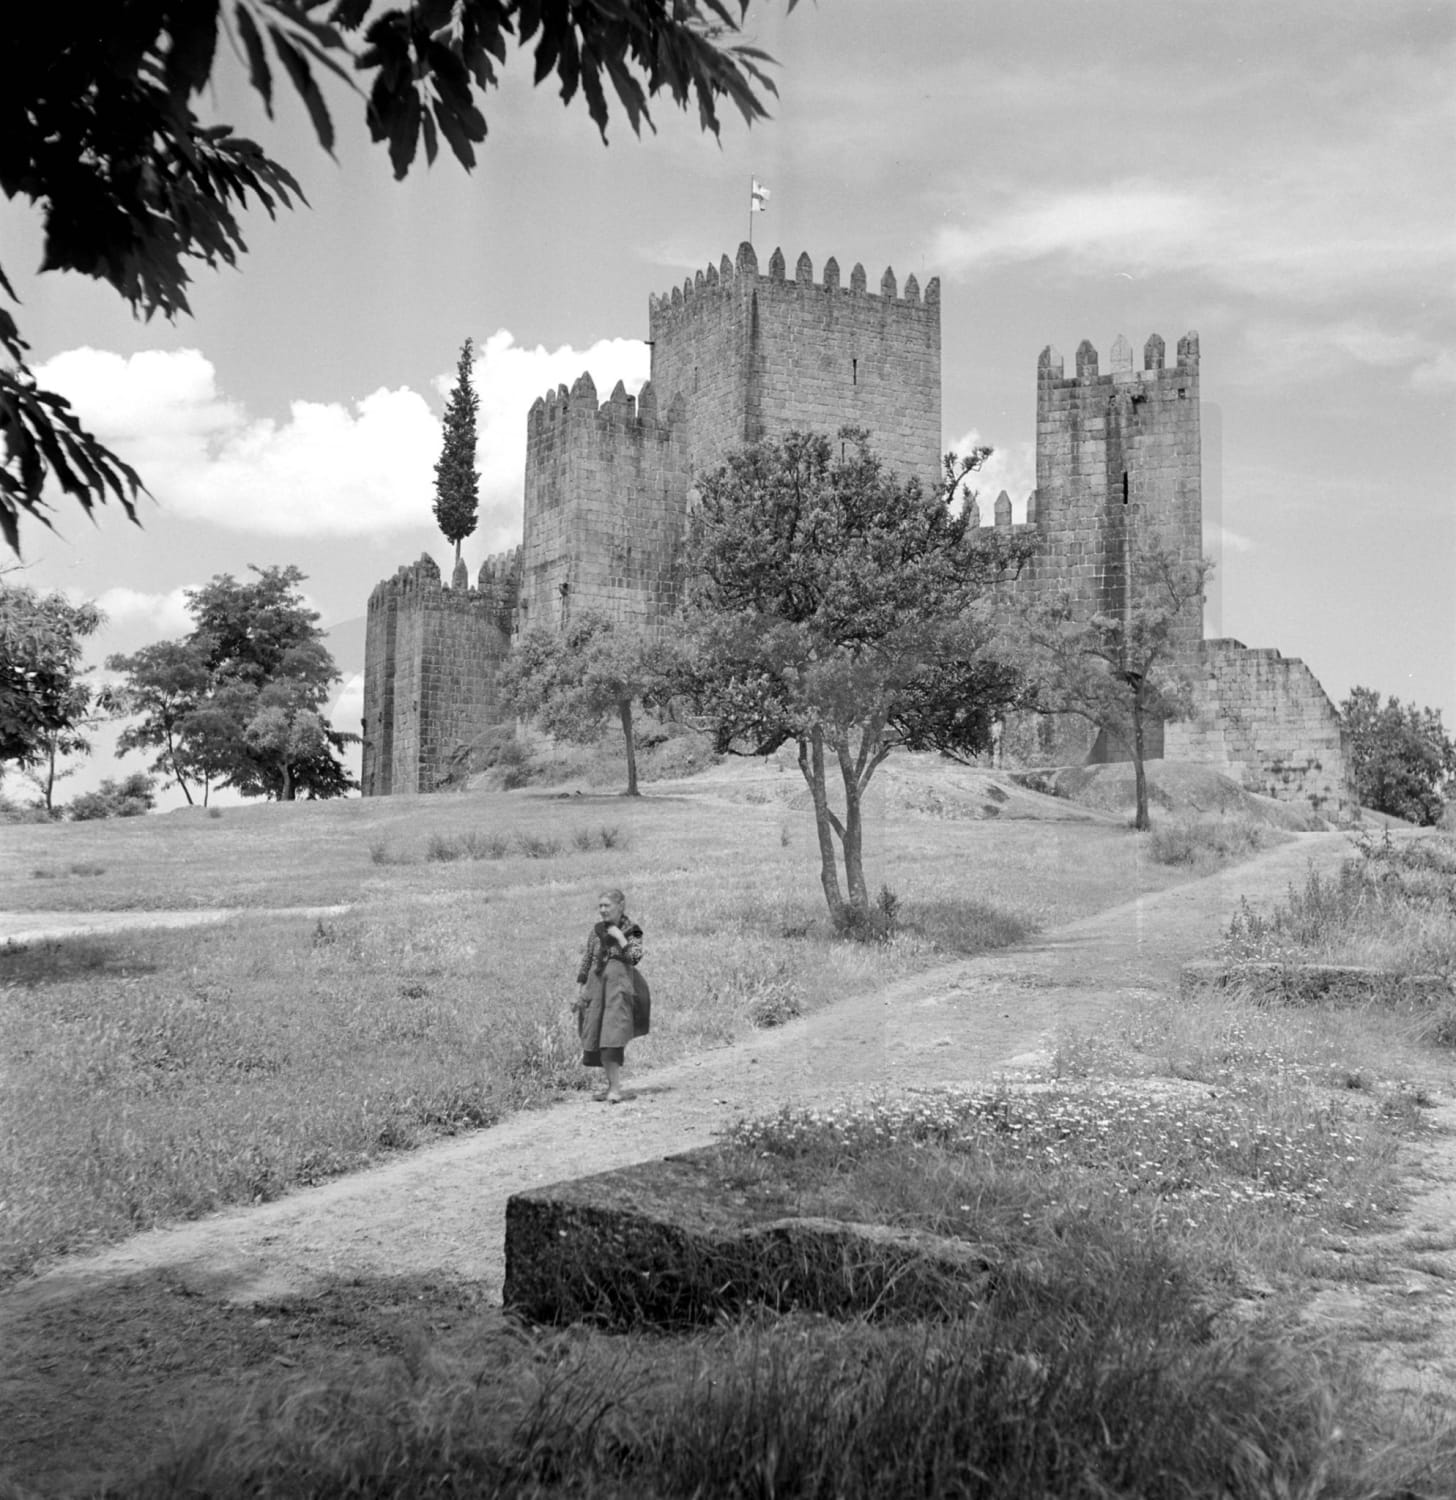 The Castle of Guimarães, birthplace of the Portuguese nation. It was in this castle that, 881 years ago, Portugal's first king, Afonso Henriques, established the independent Kingdom of Portugal. Picture taken in 1952.